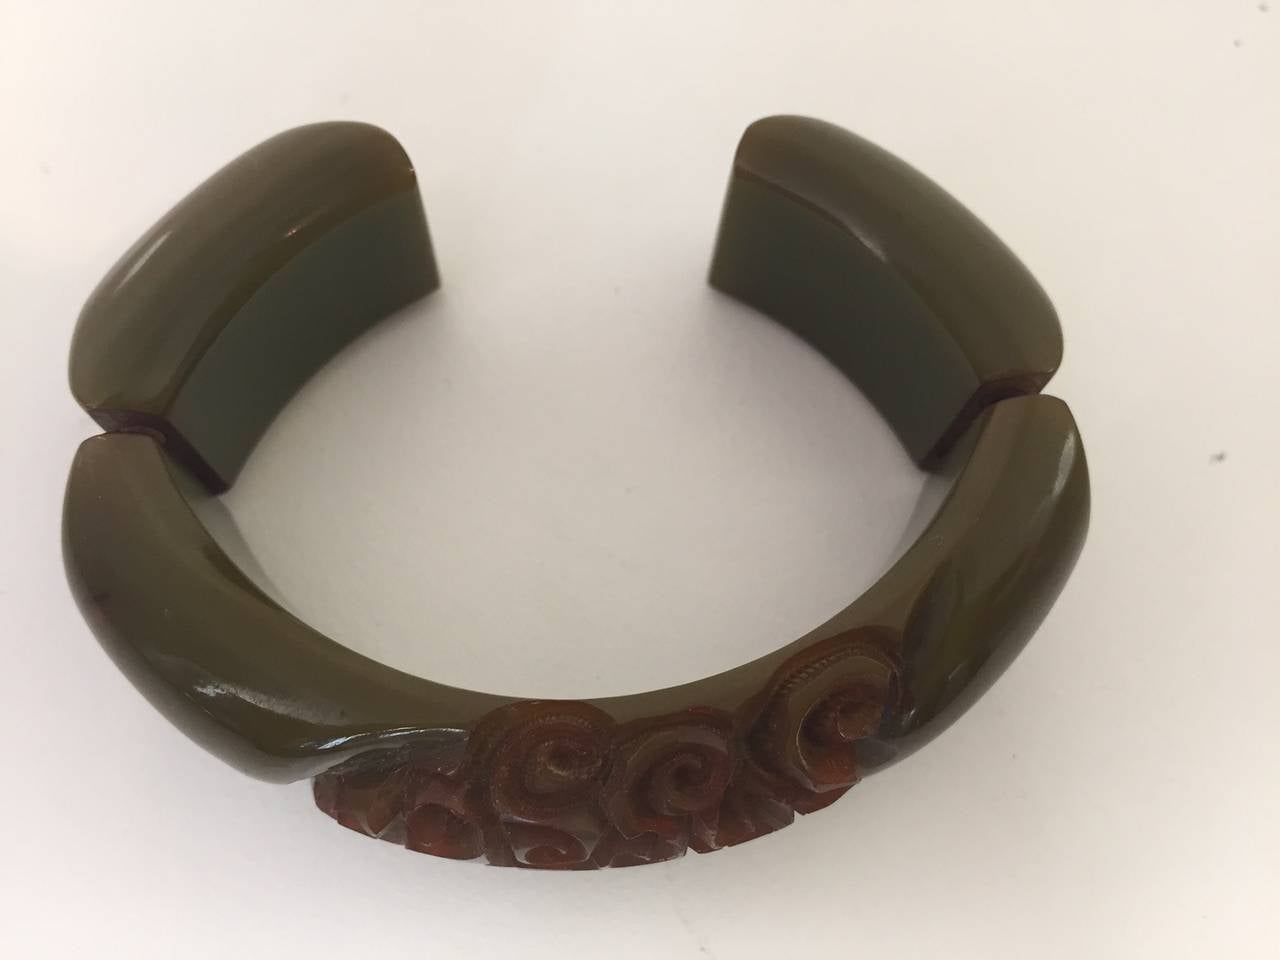 Beautifully carved Bakelit 1940s cuff bracelet with flexible 